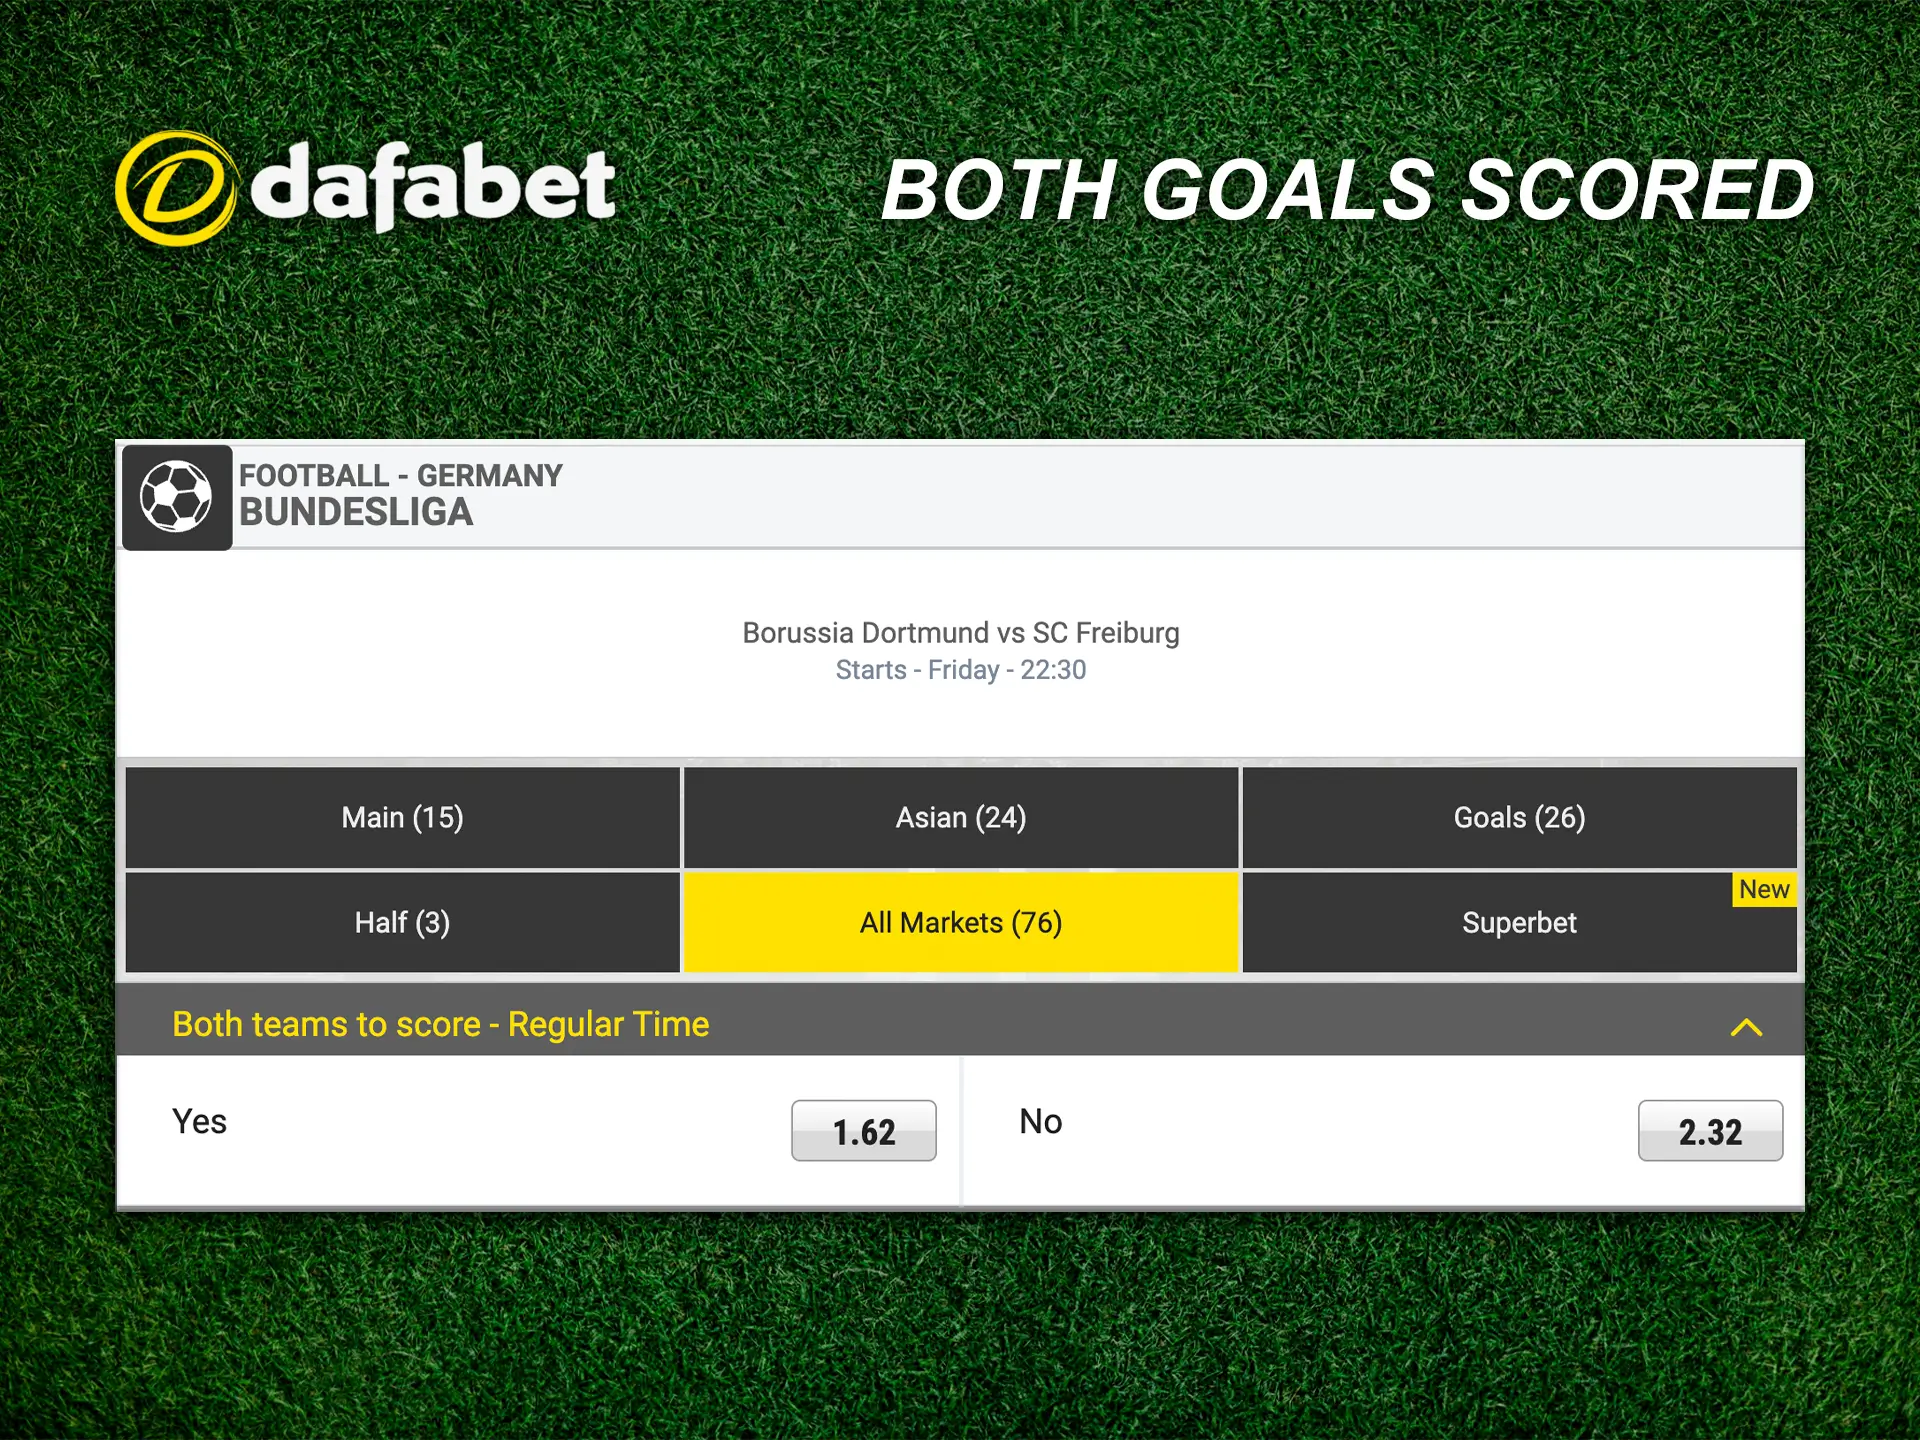 The bet when two teams score a goal is the best bet for new and experienced users at Dafabet.